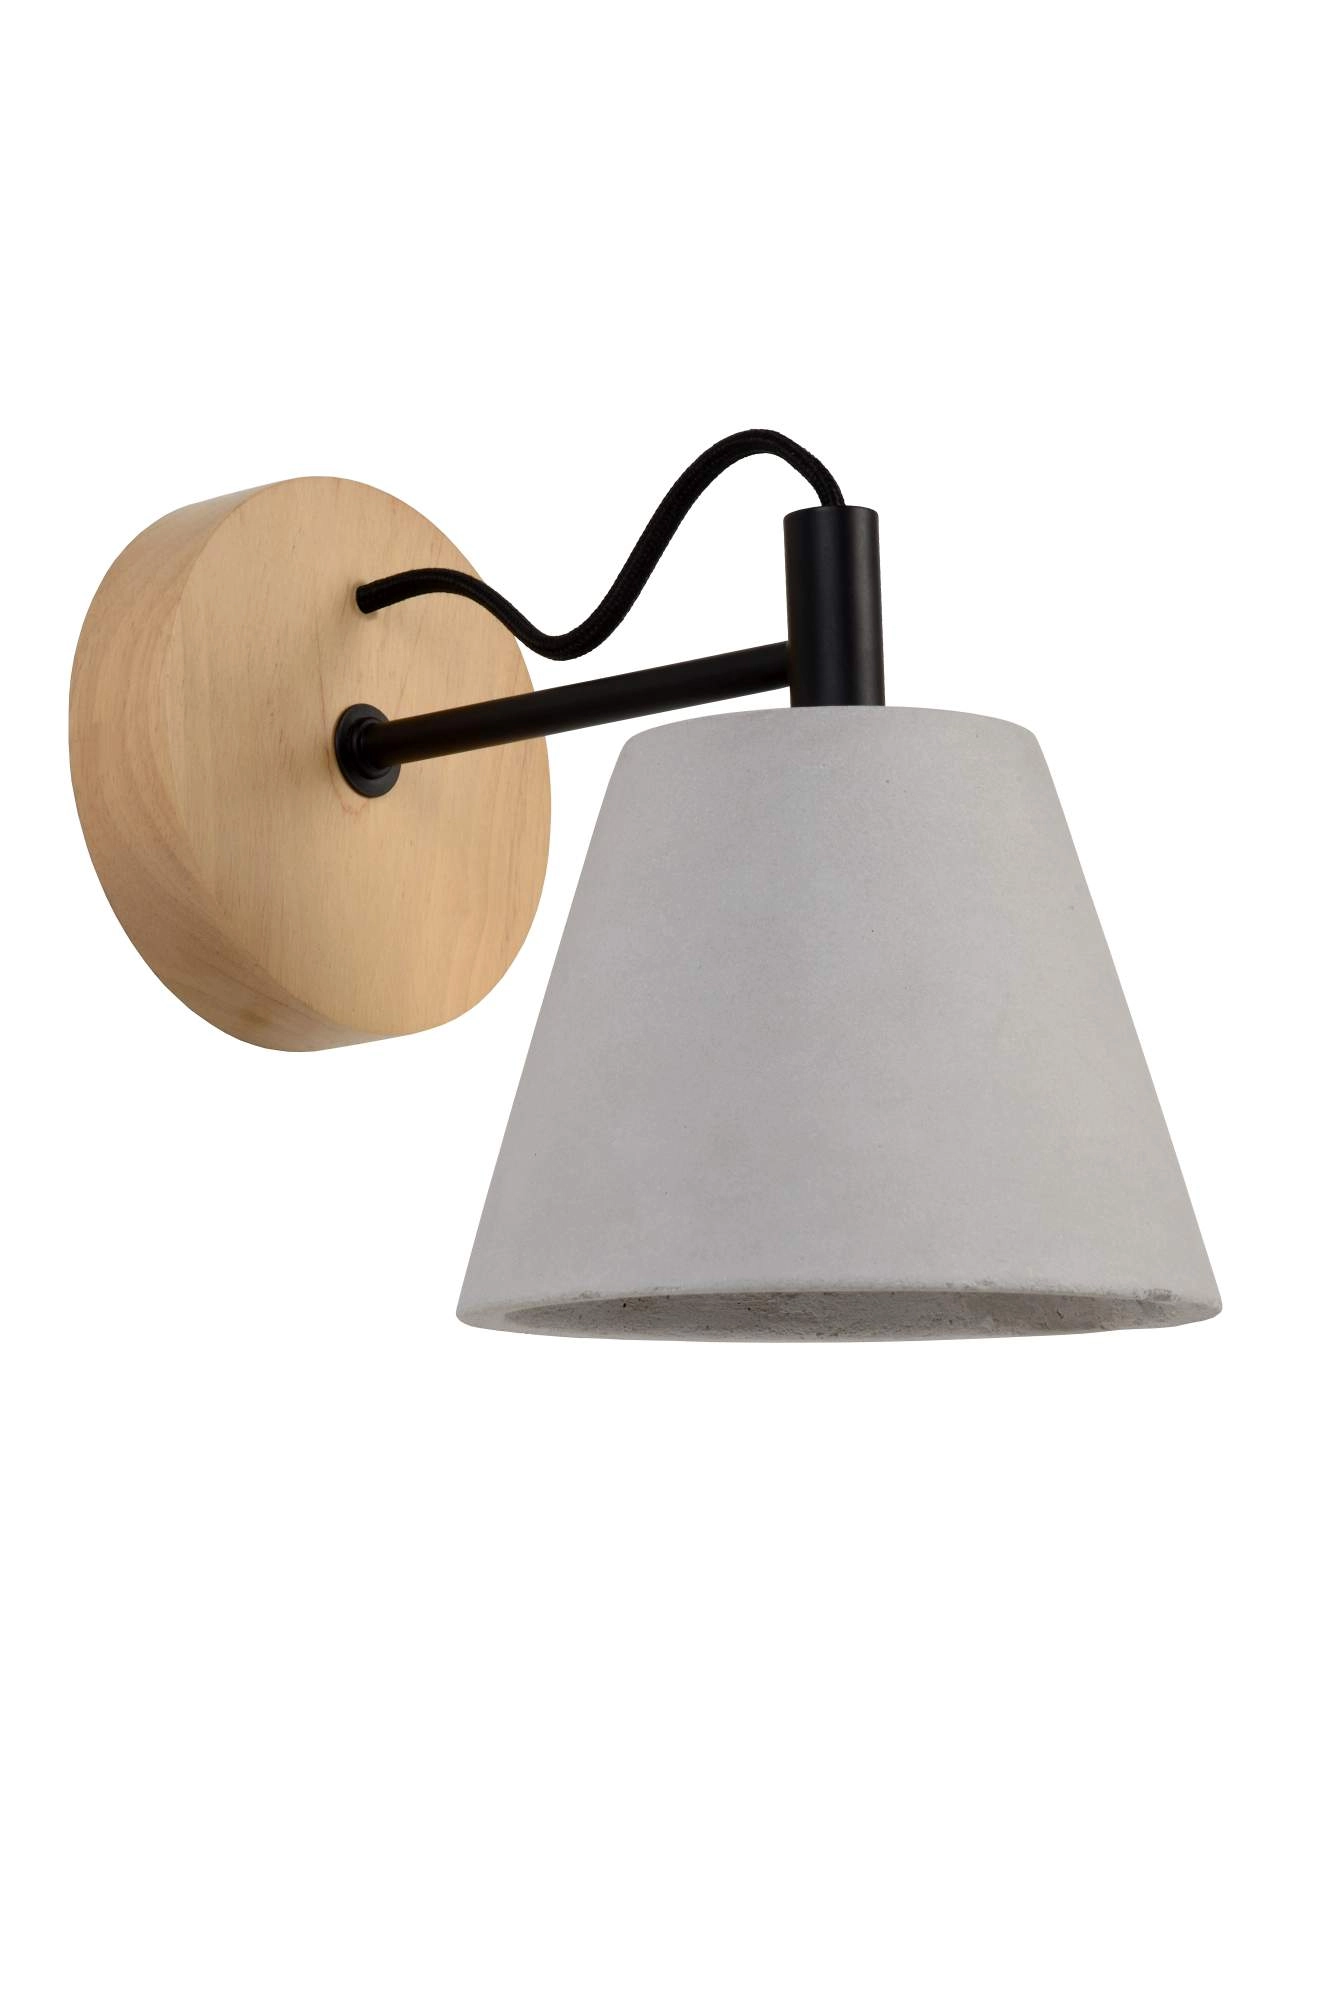 LU 03213/01/41 Lucide POSSIO - Wall light - 1xE14 - Taupe